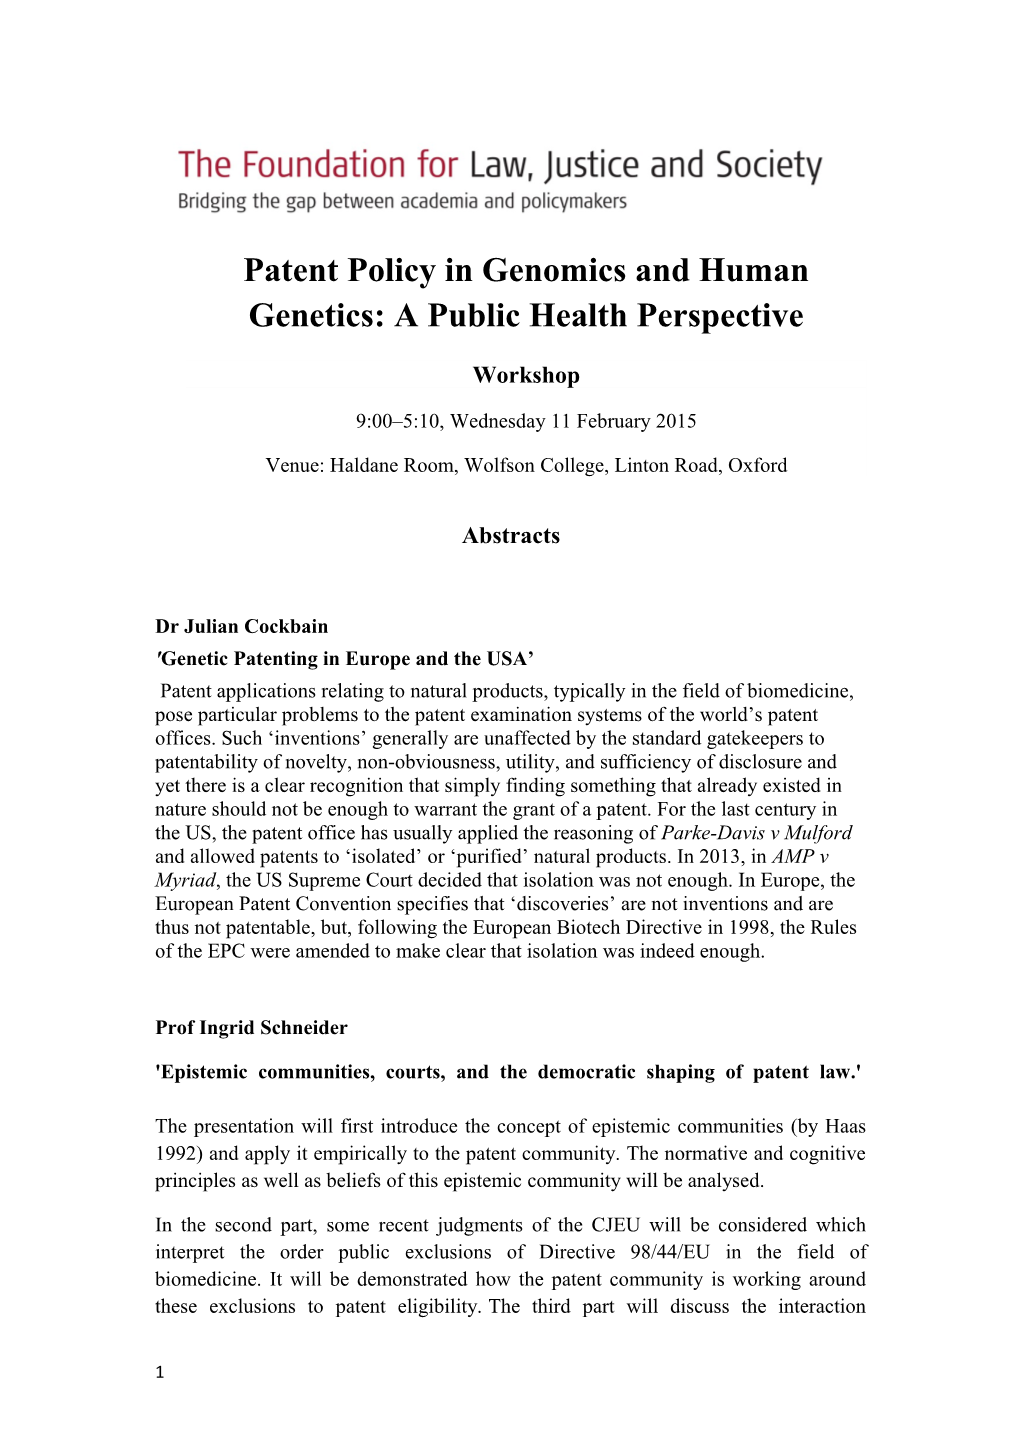 Patent Policy in Genomics and Human Genetics: a Public Health Perspective